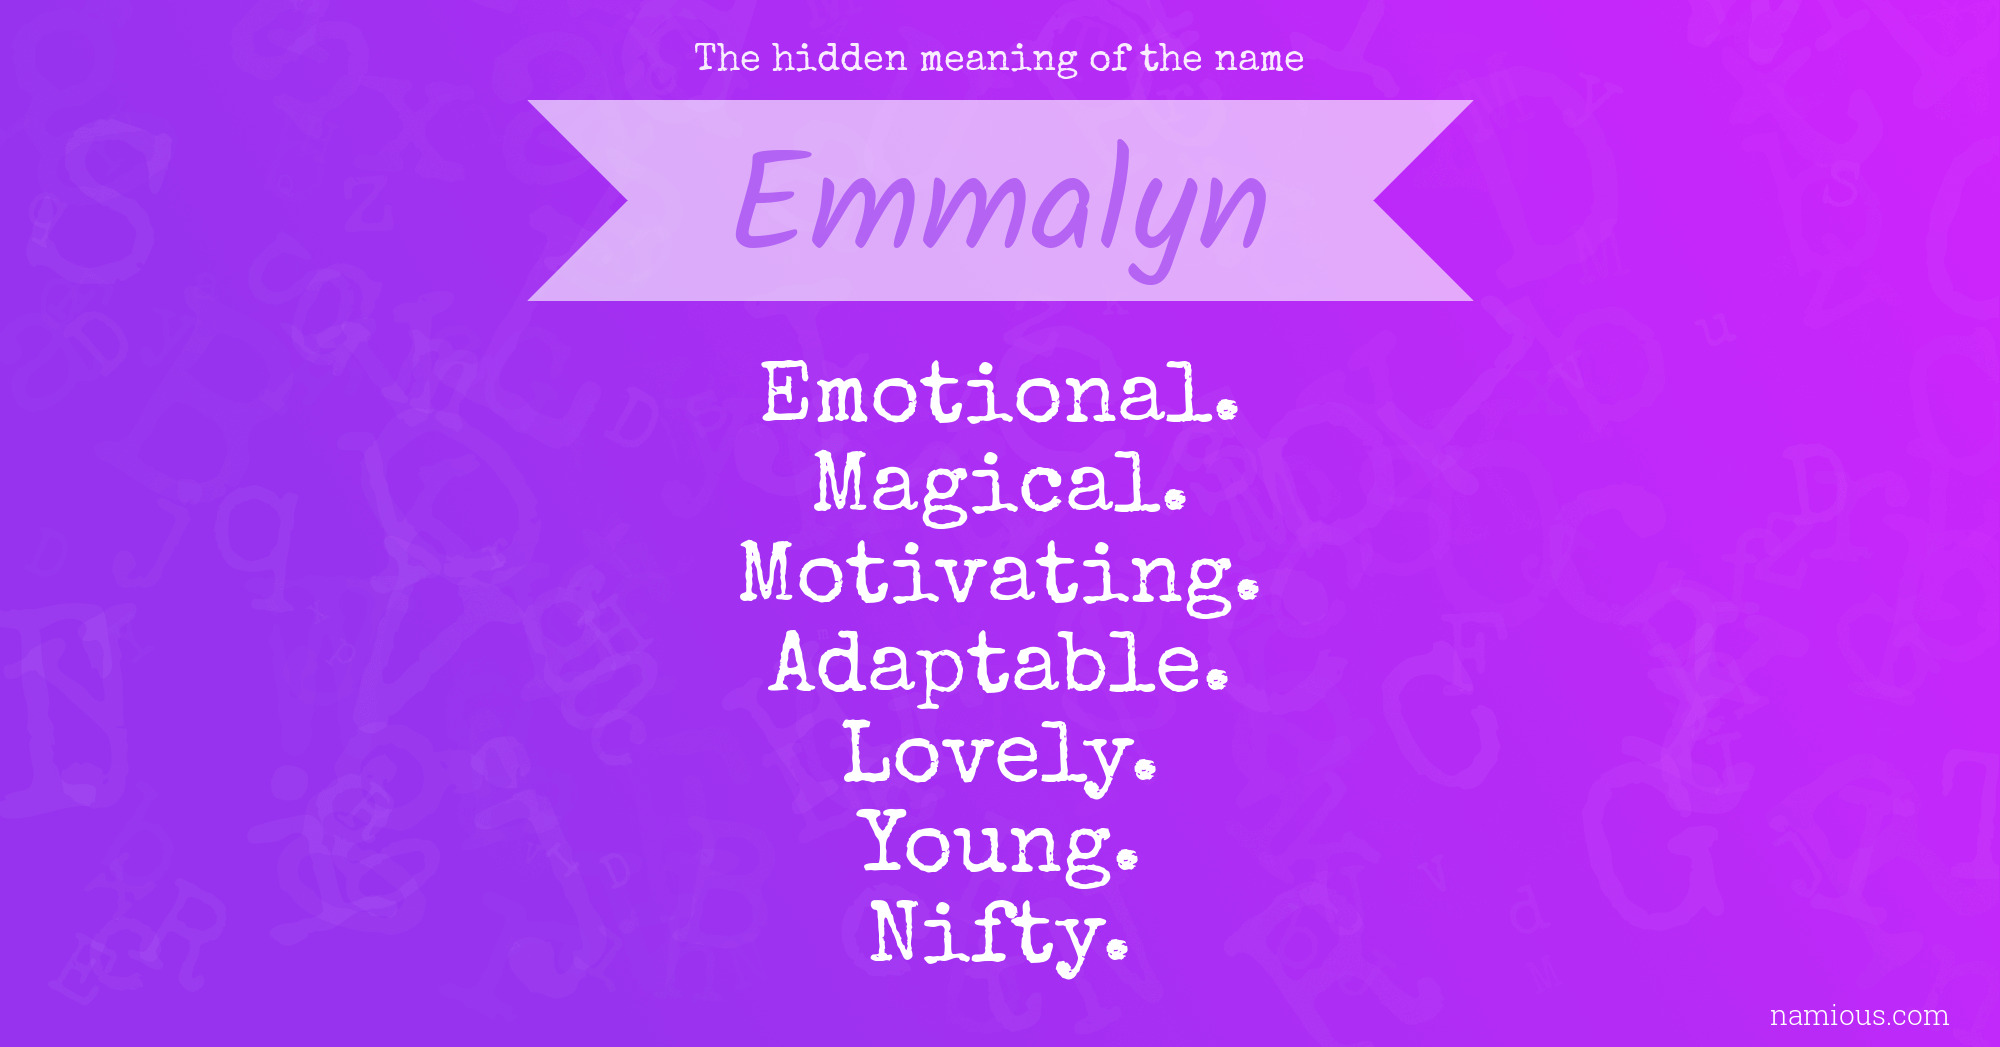 The hidden meaning of the name Emmalyn